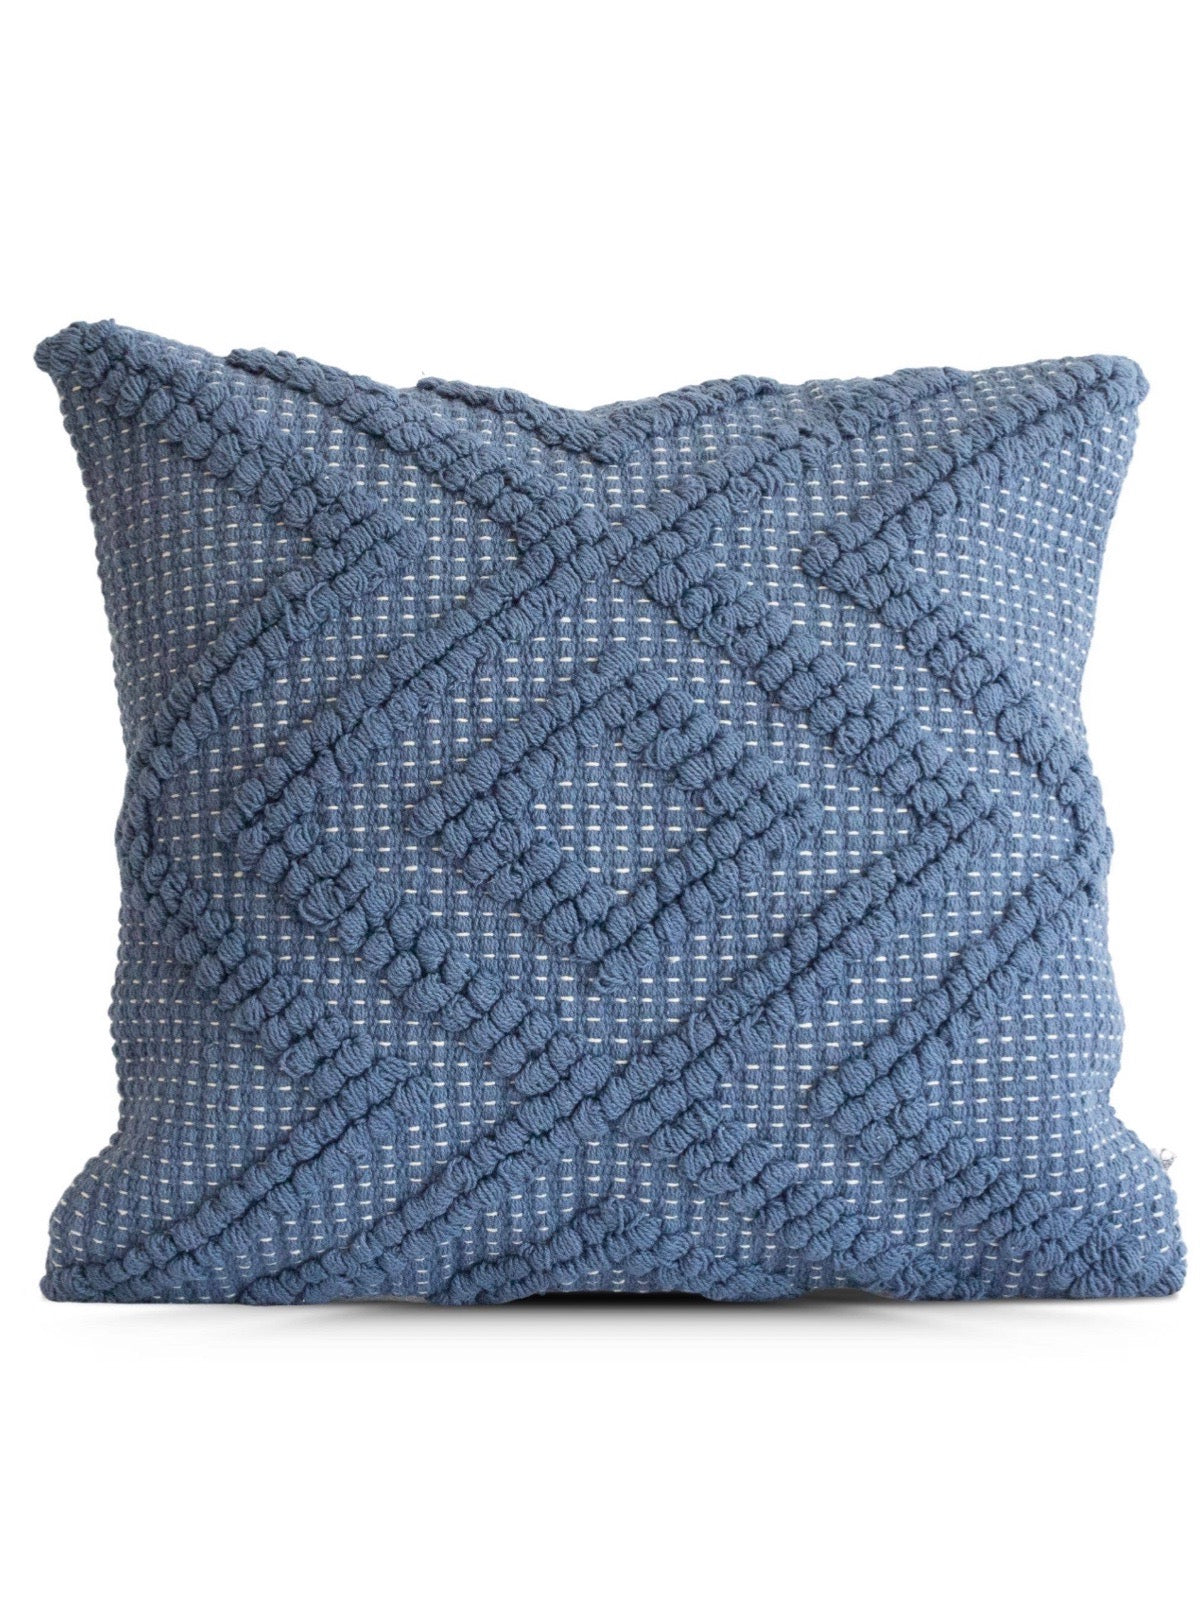 Add a boho flare to any space with this 100% cotton 18x18 Pillow Cover. This tribal design is inspired by the classic design element of the diamond. Sold by KYA Home Decor